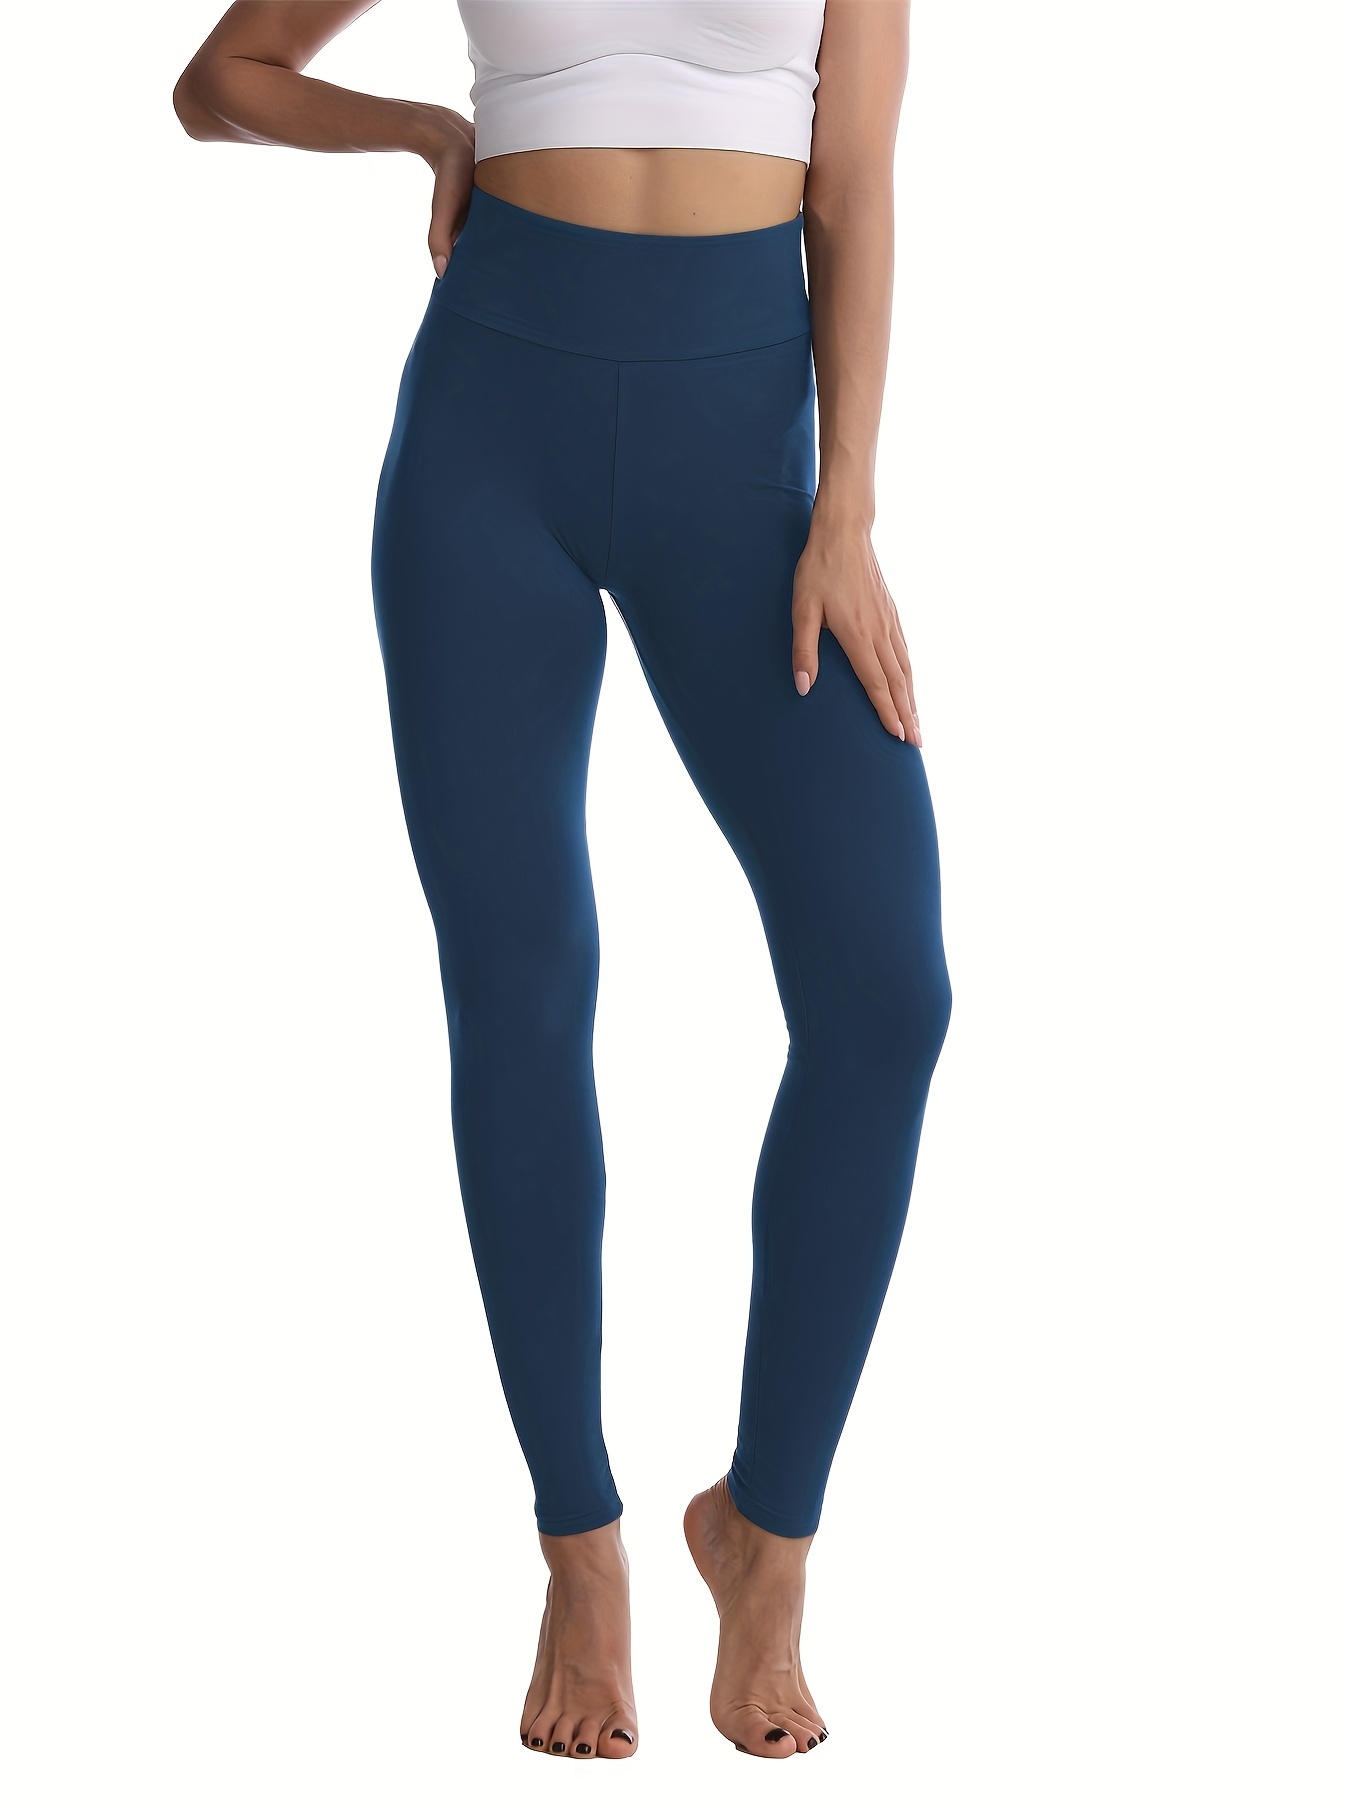  Navy Blue Plain Yoga Leggings for Women High Waist Tummy  Control Tights Butt Lifting Leggings with Pockets X-Small : Clothing, Shoes  & Jewelry